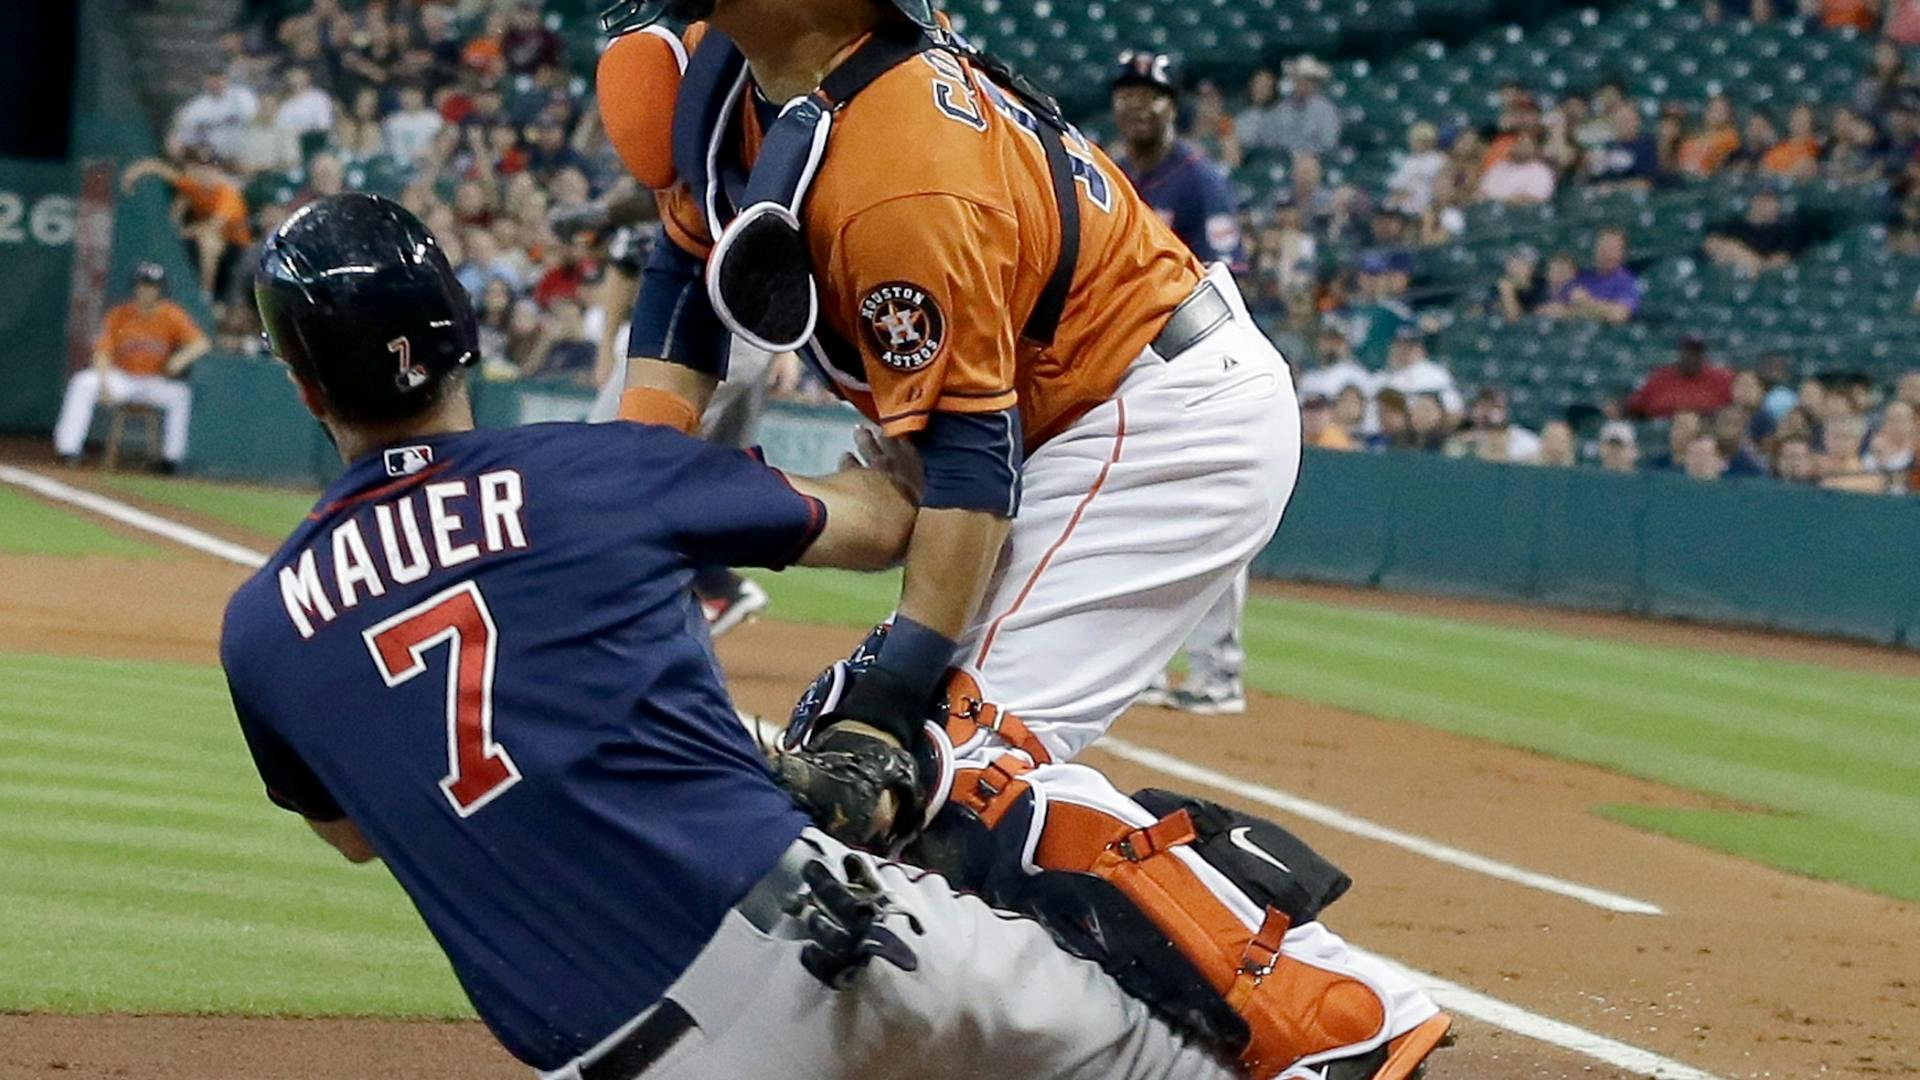 Twins first baseman Joe Mauer thought his out at the plate would be overturned Friday, because "I had nowhere to go" as catcher Hank Conger blocked the baseline.